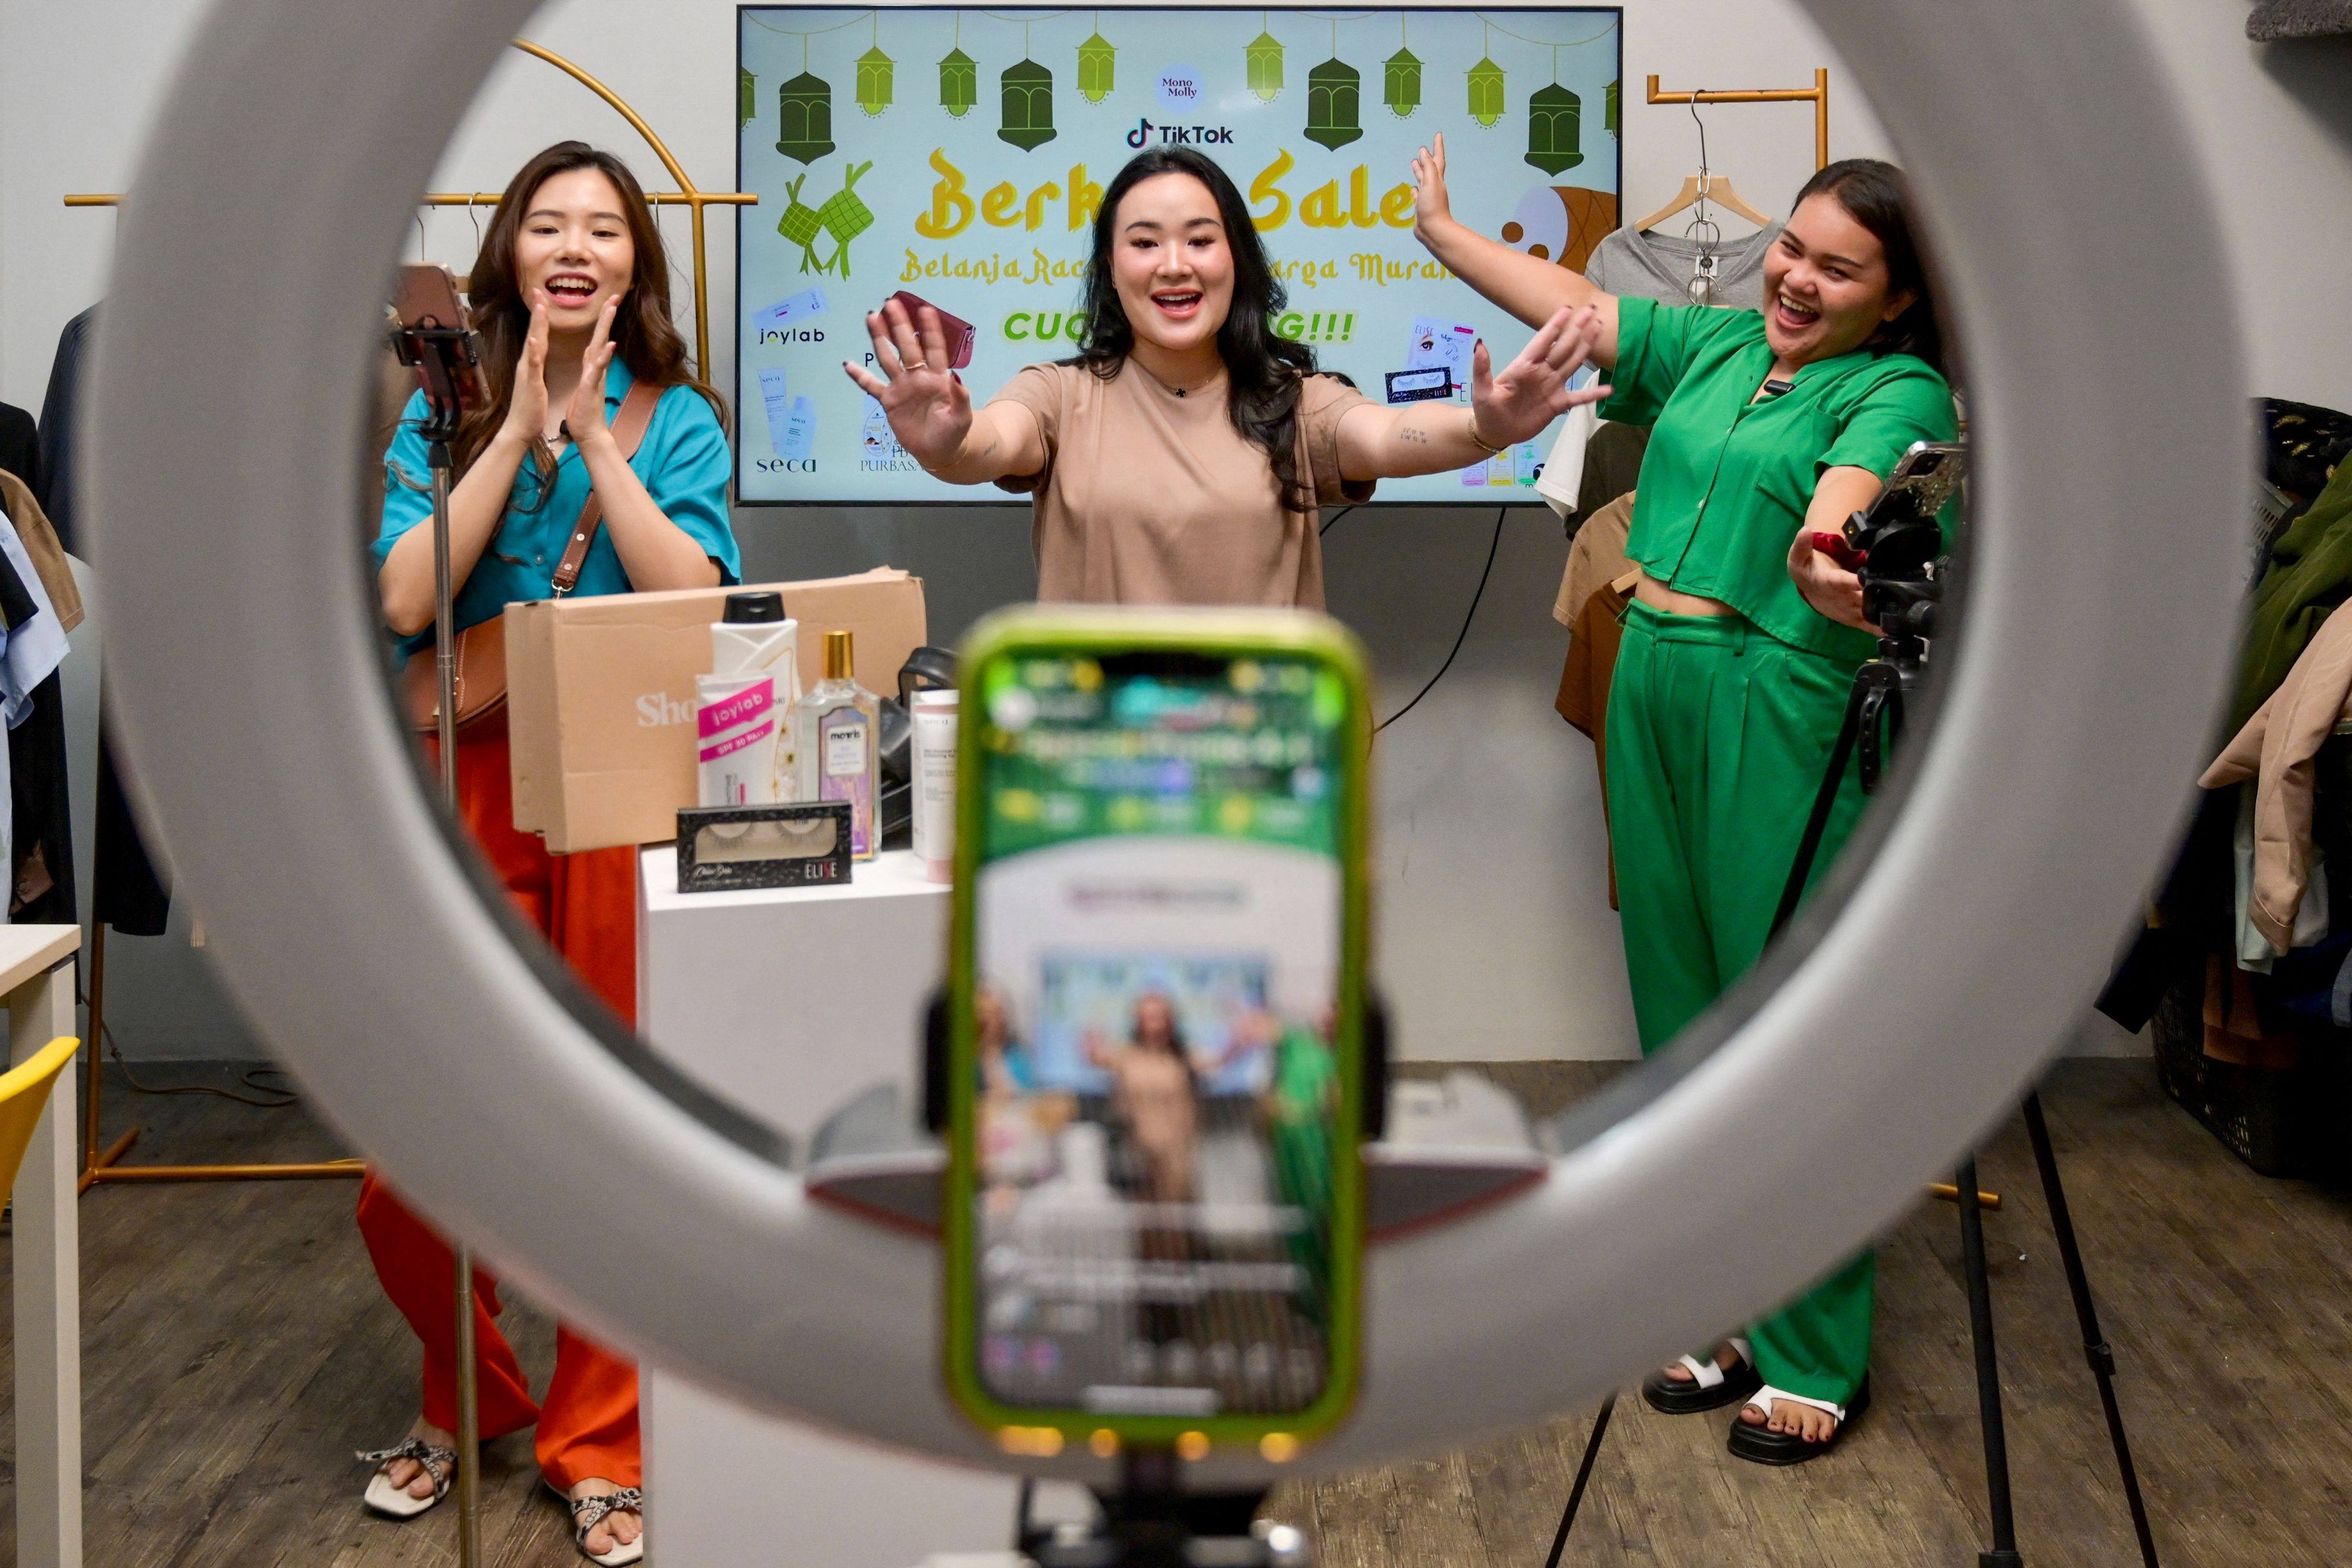 Online sellers offer goods to viewers of a TikTok livestream in Jakarta. Photo: AFP